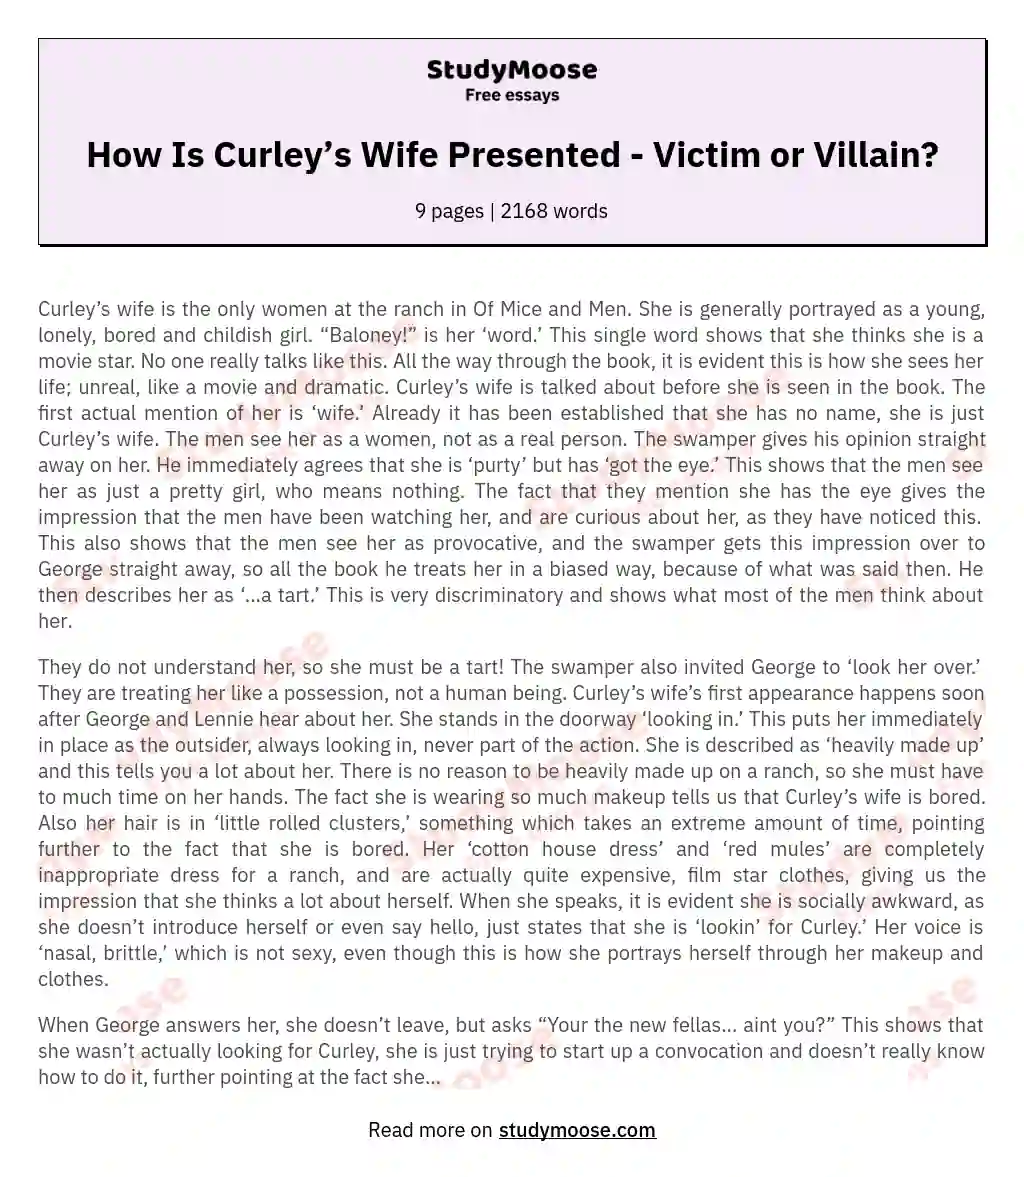 How Is Curley’s Wife Presented - Victim or Villain? essay